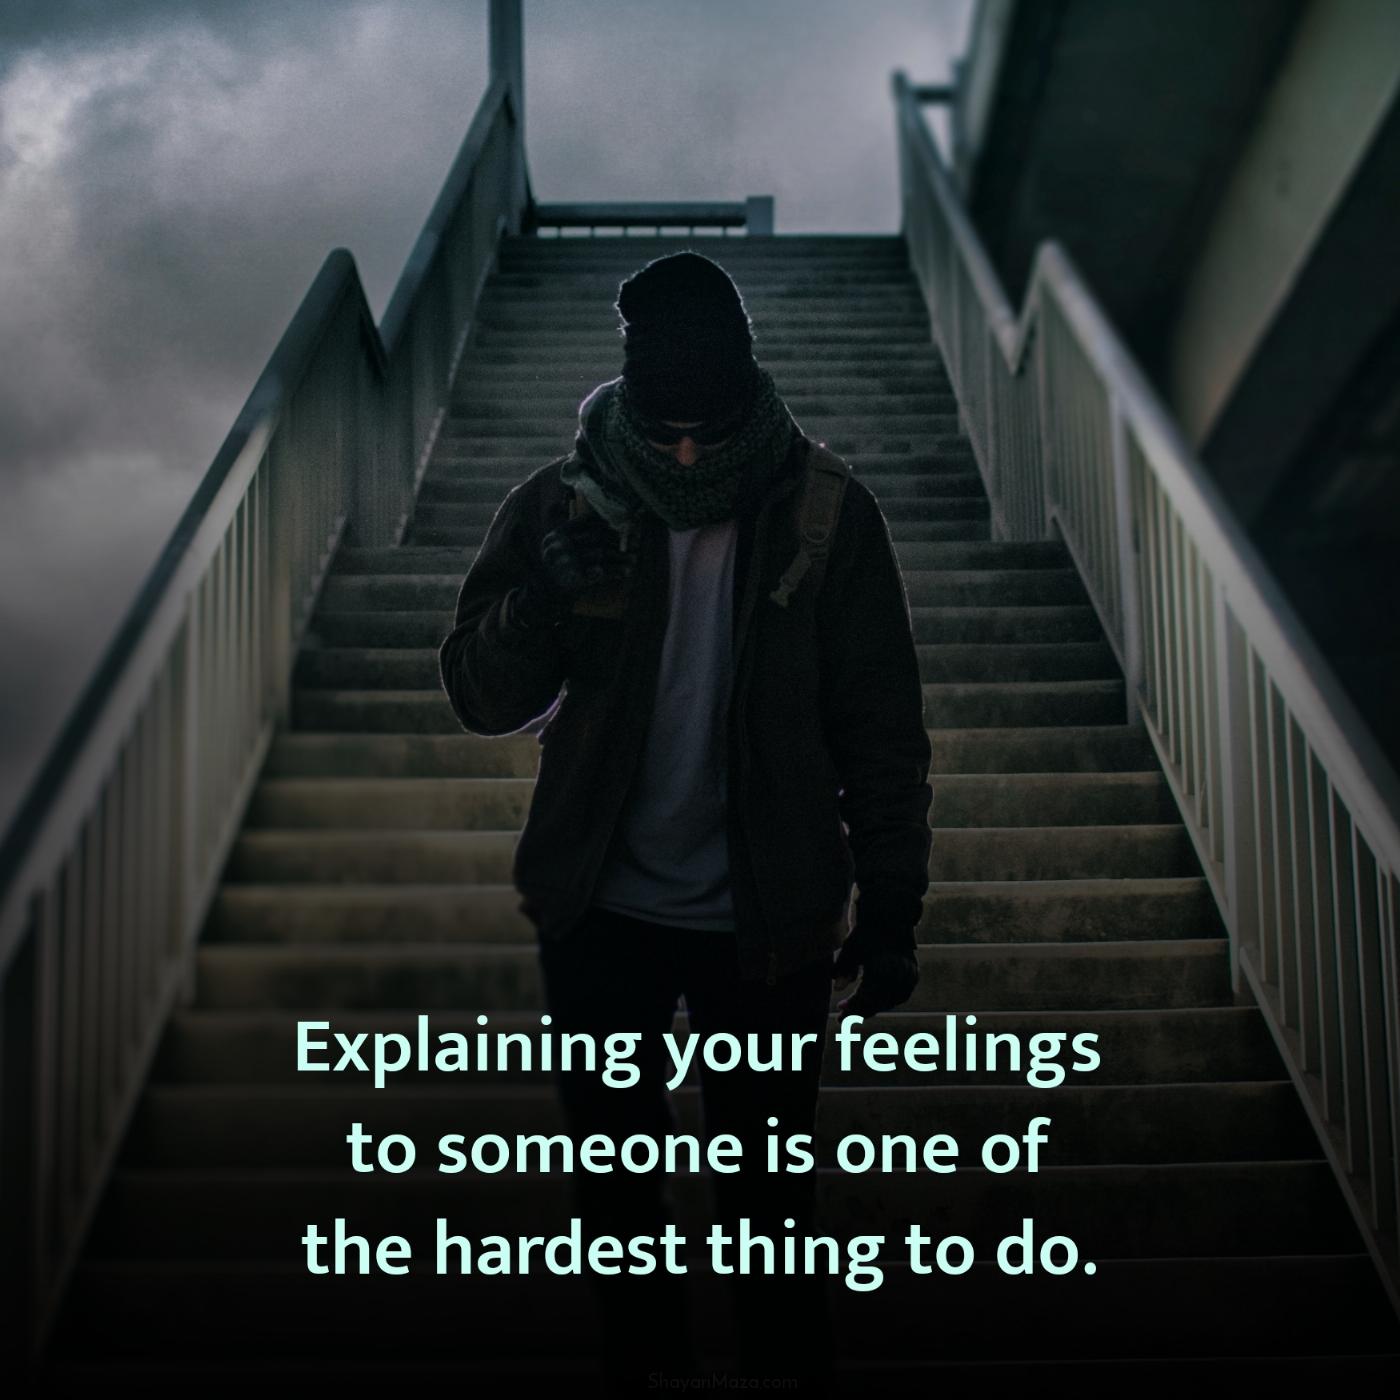 Explaining your feelings to someone is one of the hardest thing